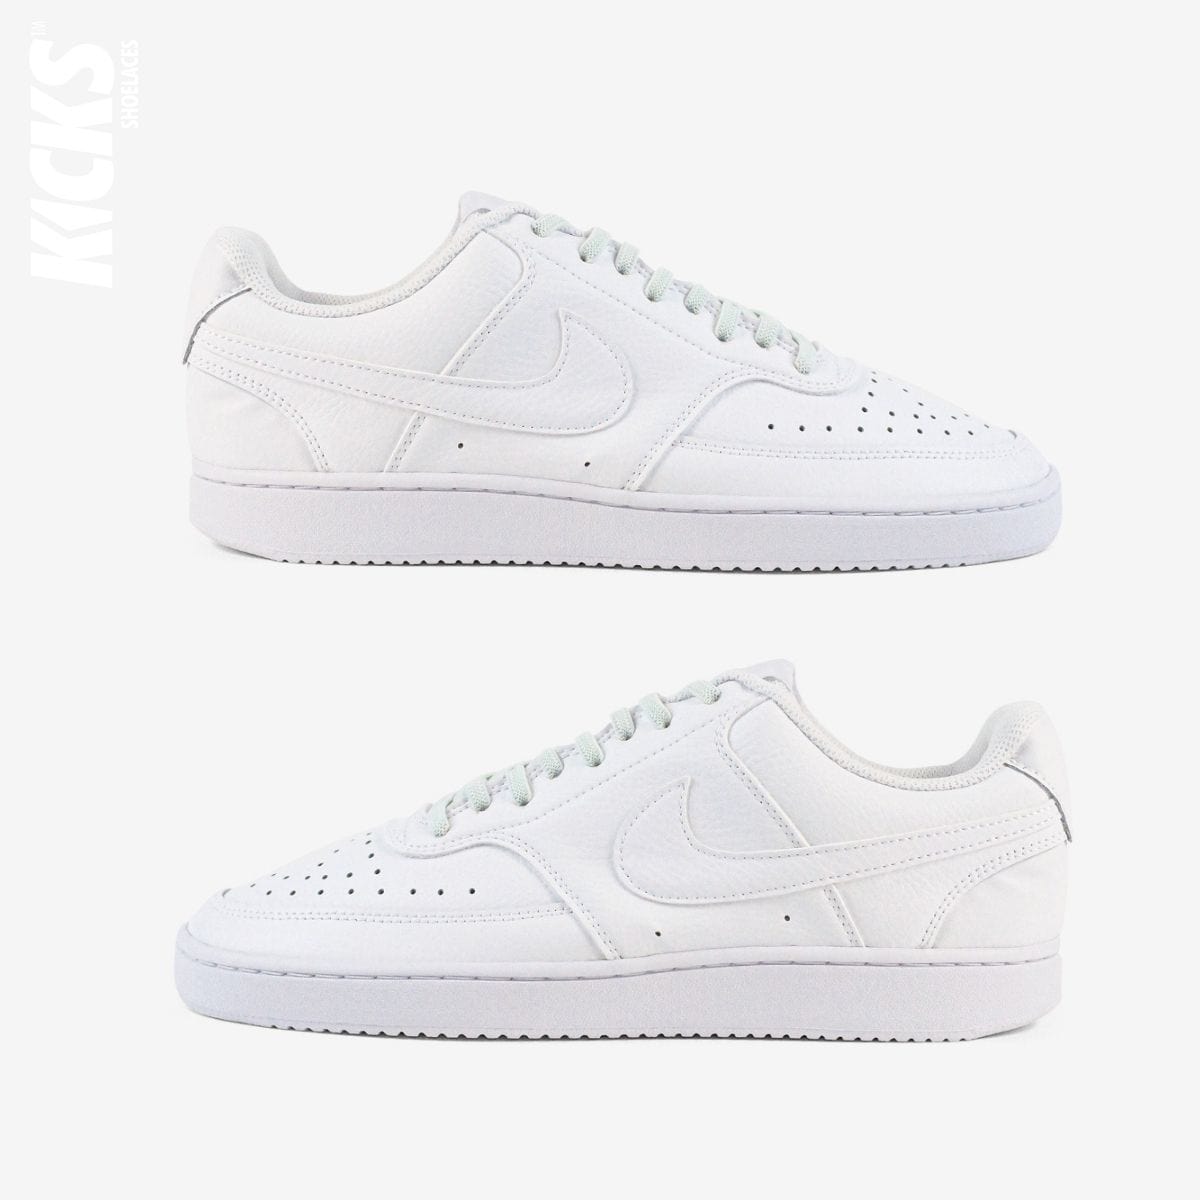 tieless-laces-with-pastel-green-laces-on-nike-white-sneakers-by-kicks-shoelaces